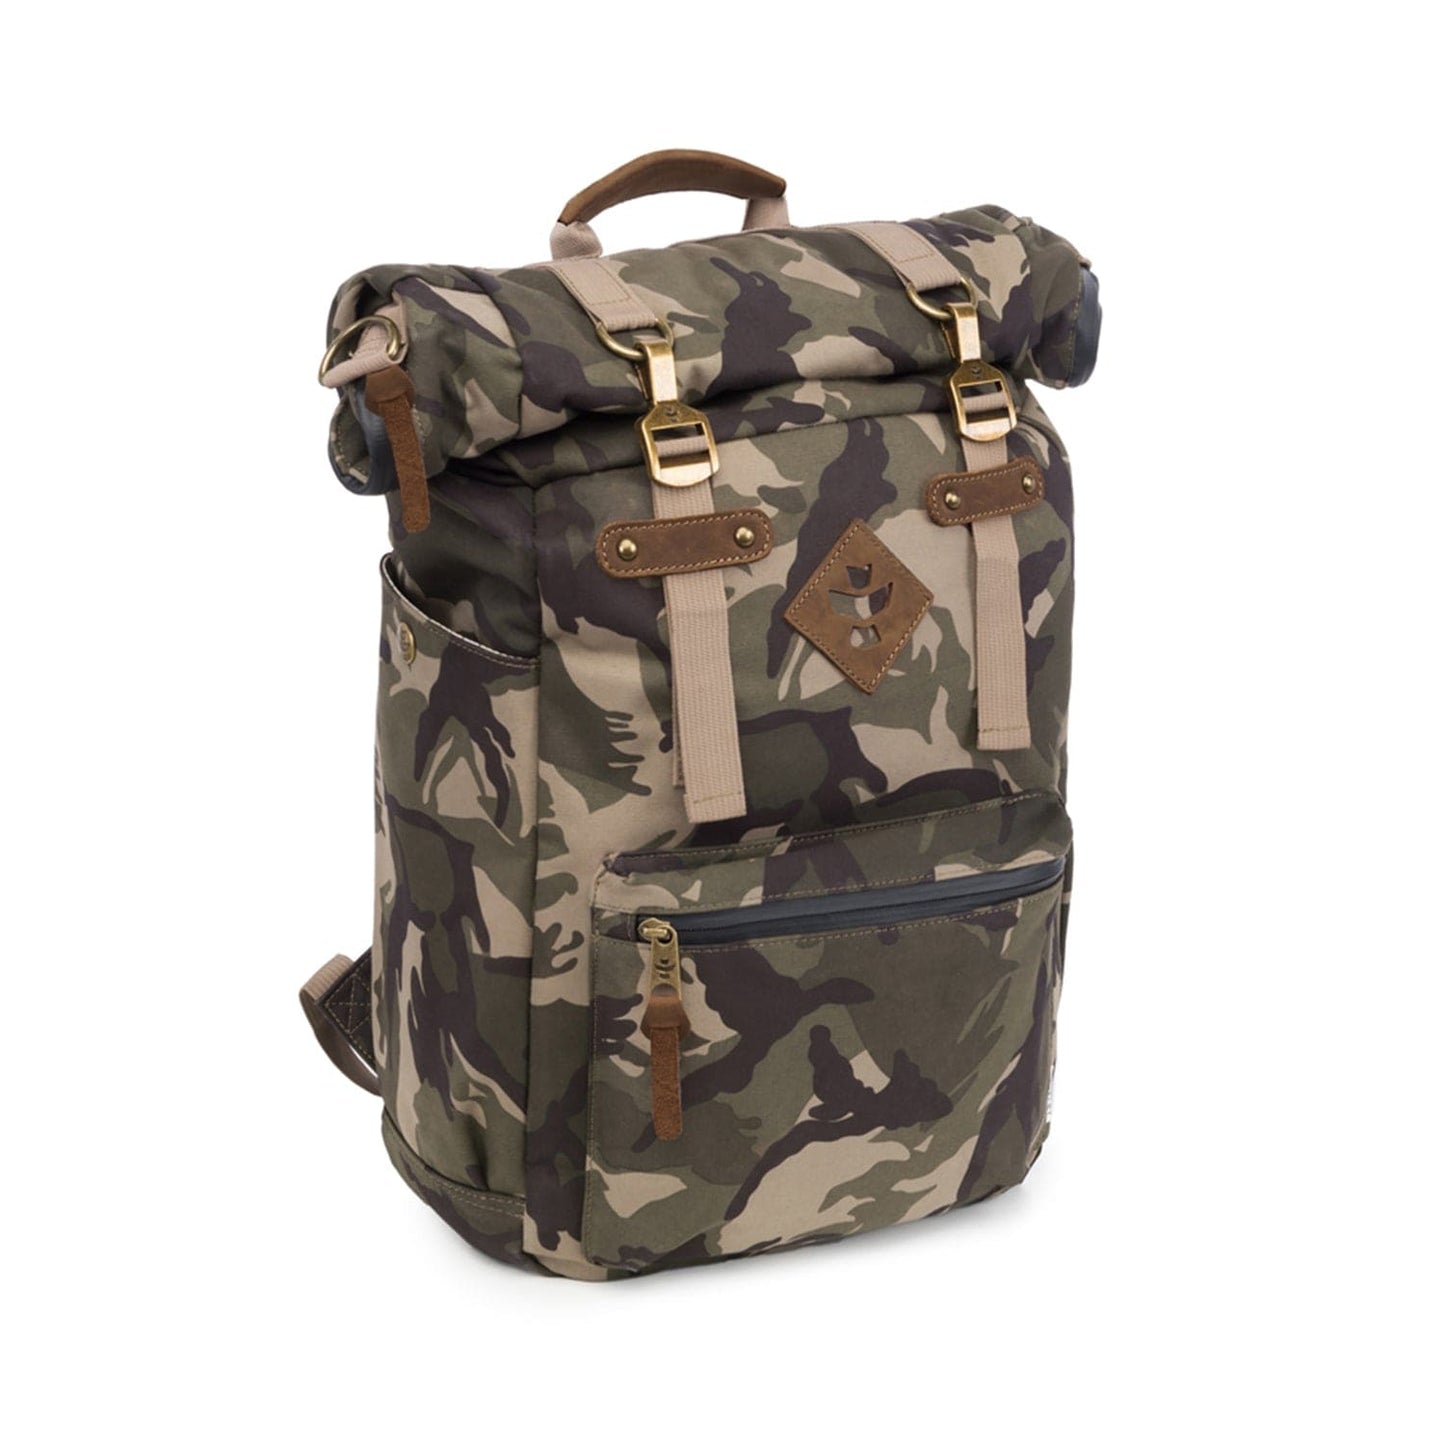 Revelry Supply Travel Bag Camo Brown The Drifter - Smell Proof Rolltop Backpack